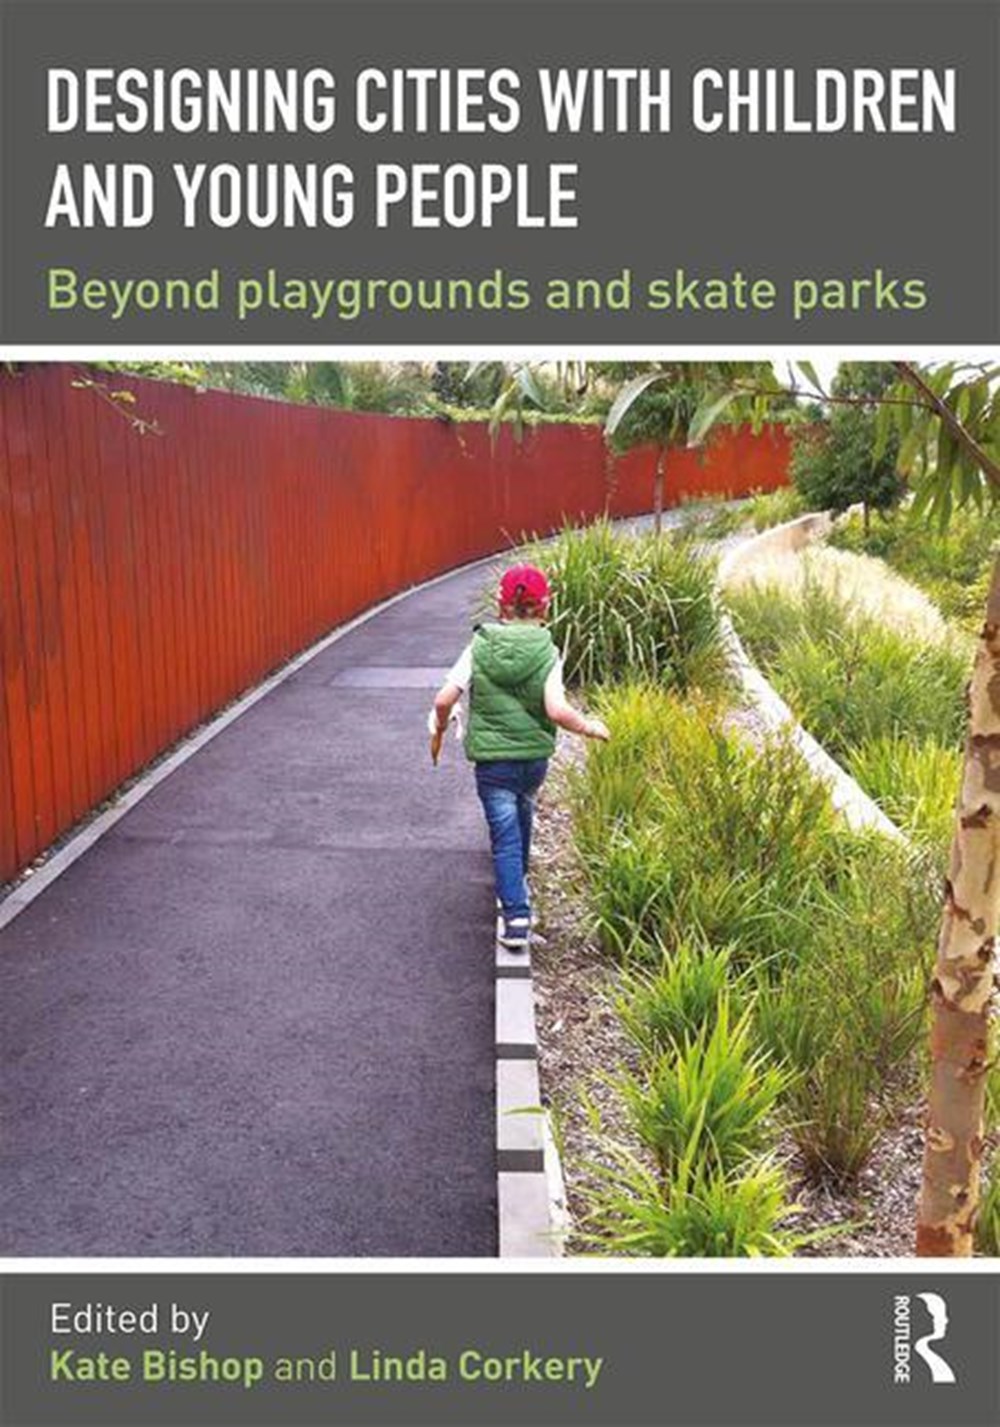 Designing Cities with Children and Young People: Beyond Playgrounds and Skate Parks